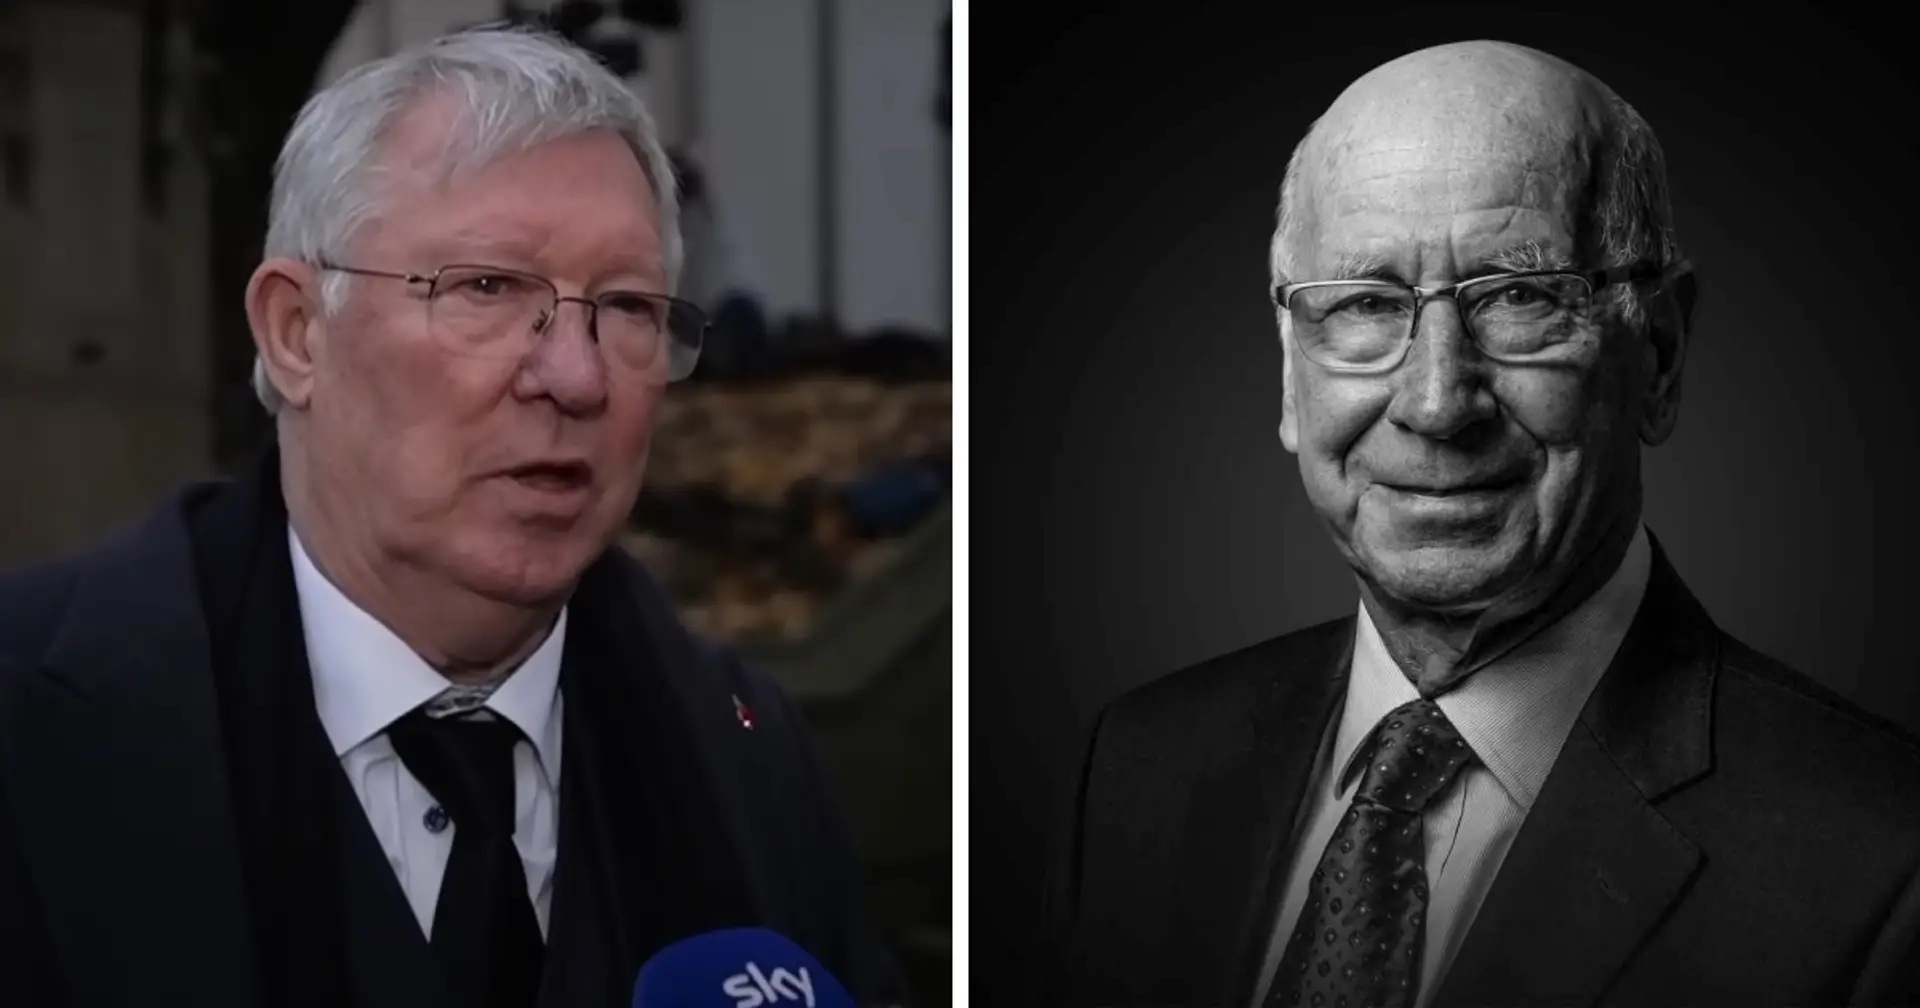 'He supported me 100 per cent, all the way': Sir Alex Ferguson pays touching tribute to Sir Bobby Charlton